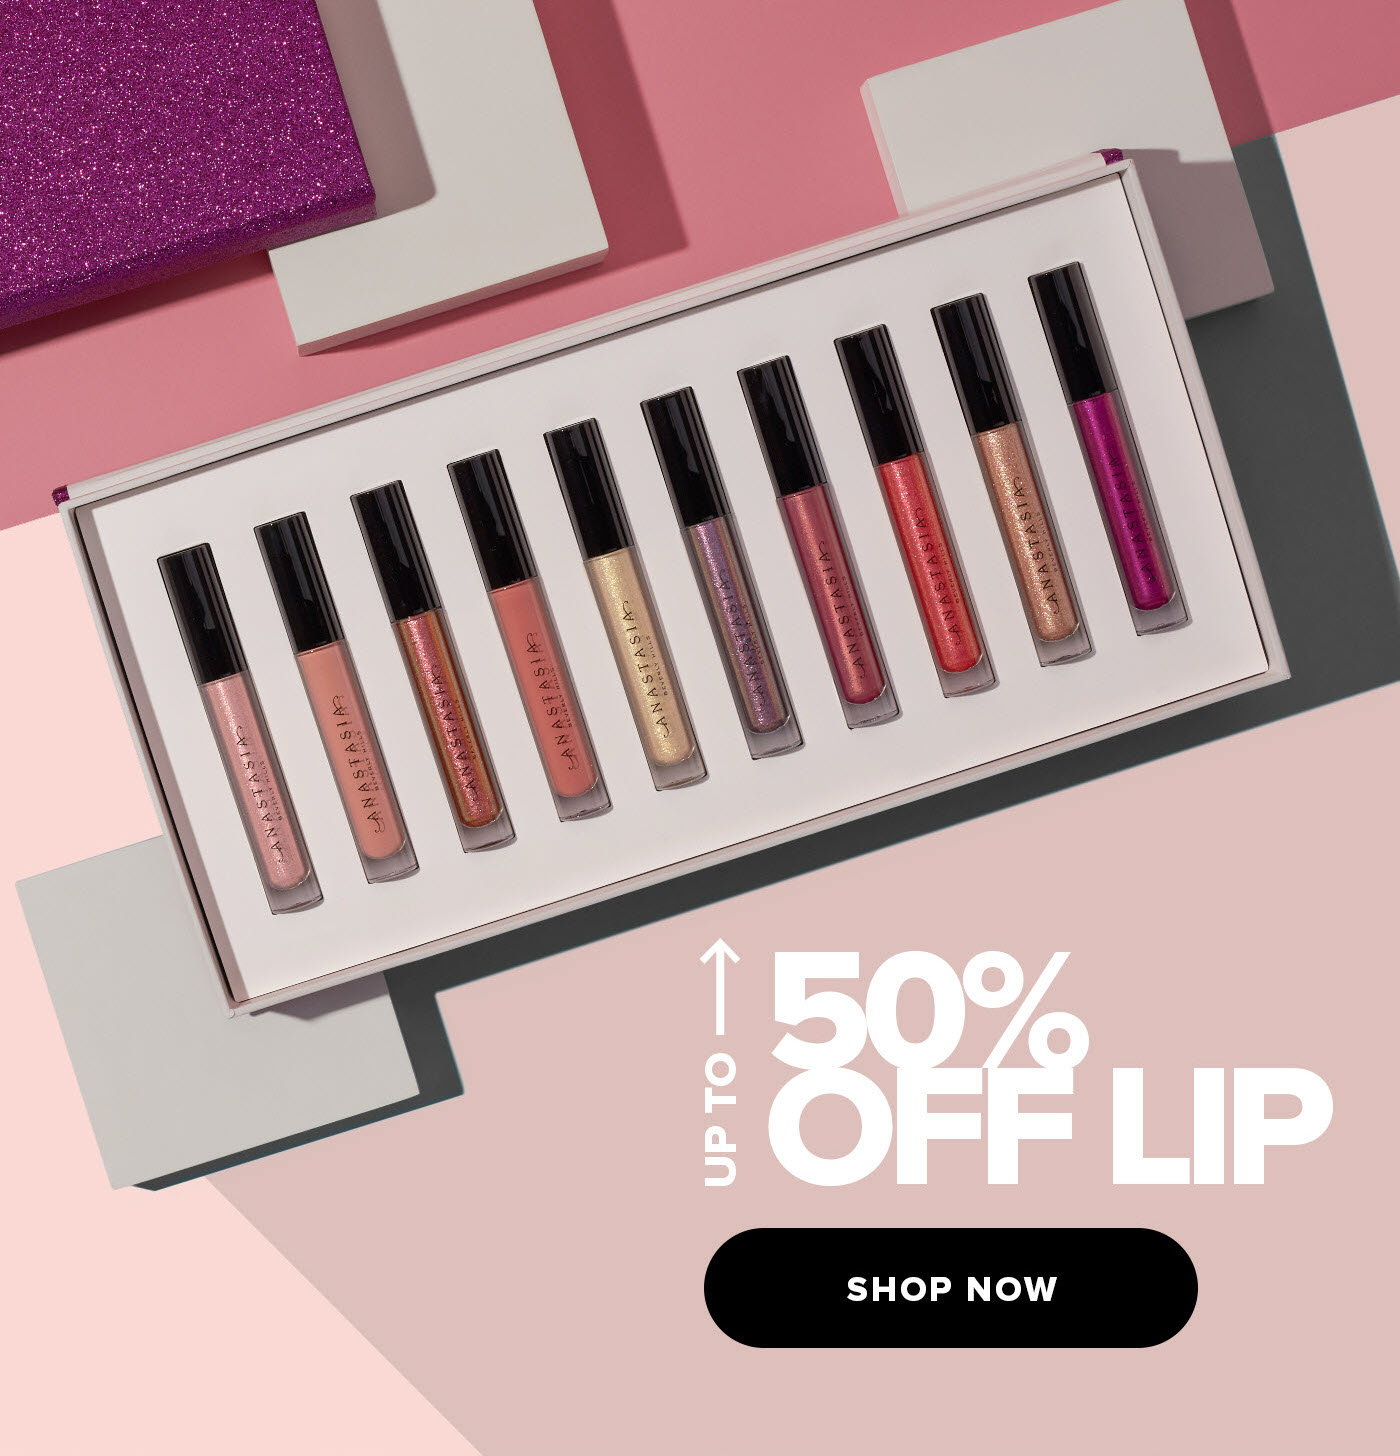 Up to 50% Off Lip - Shop Now